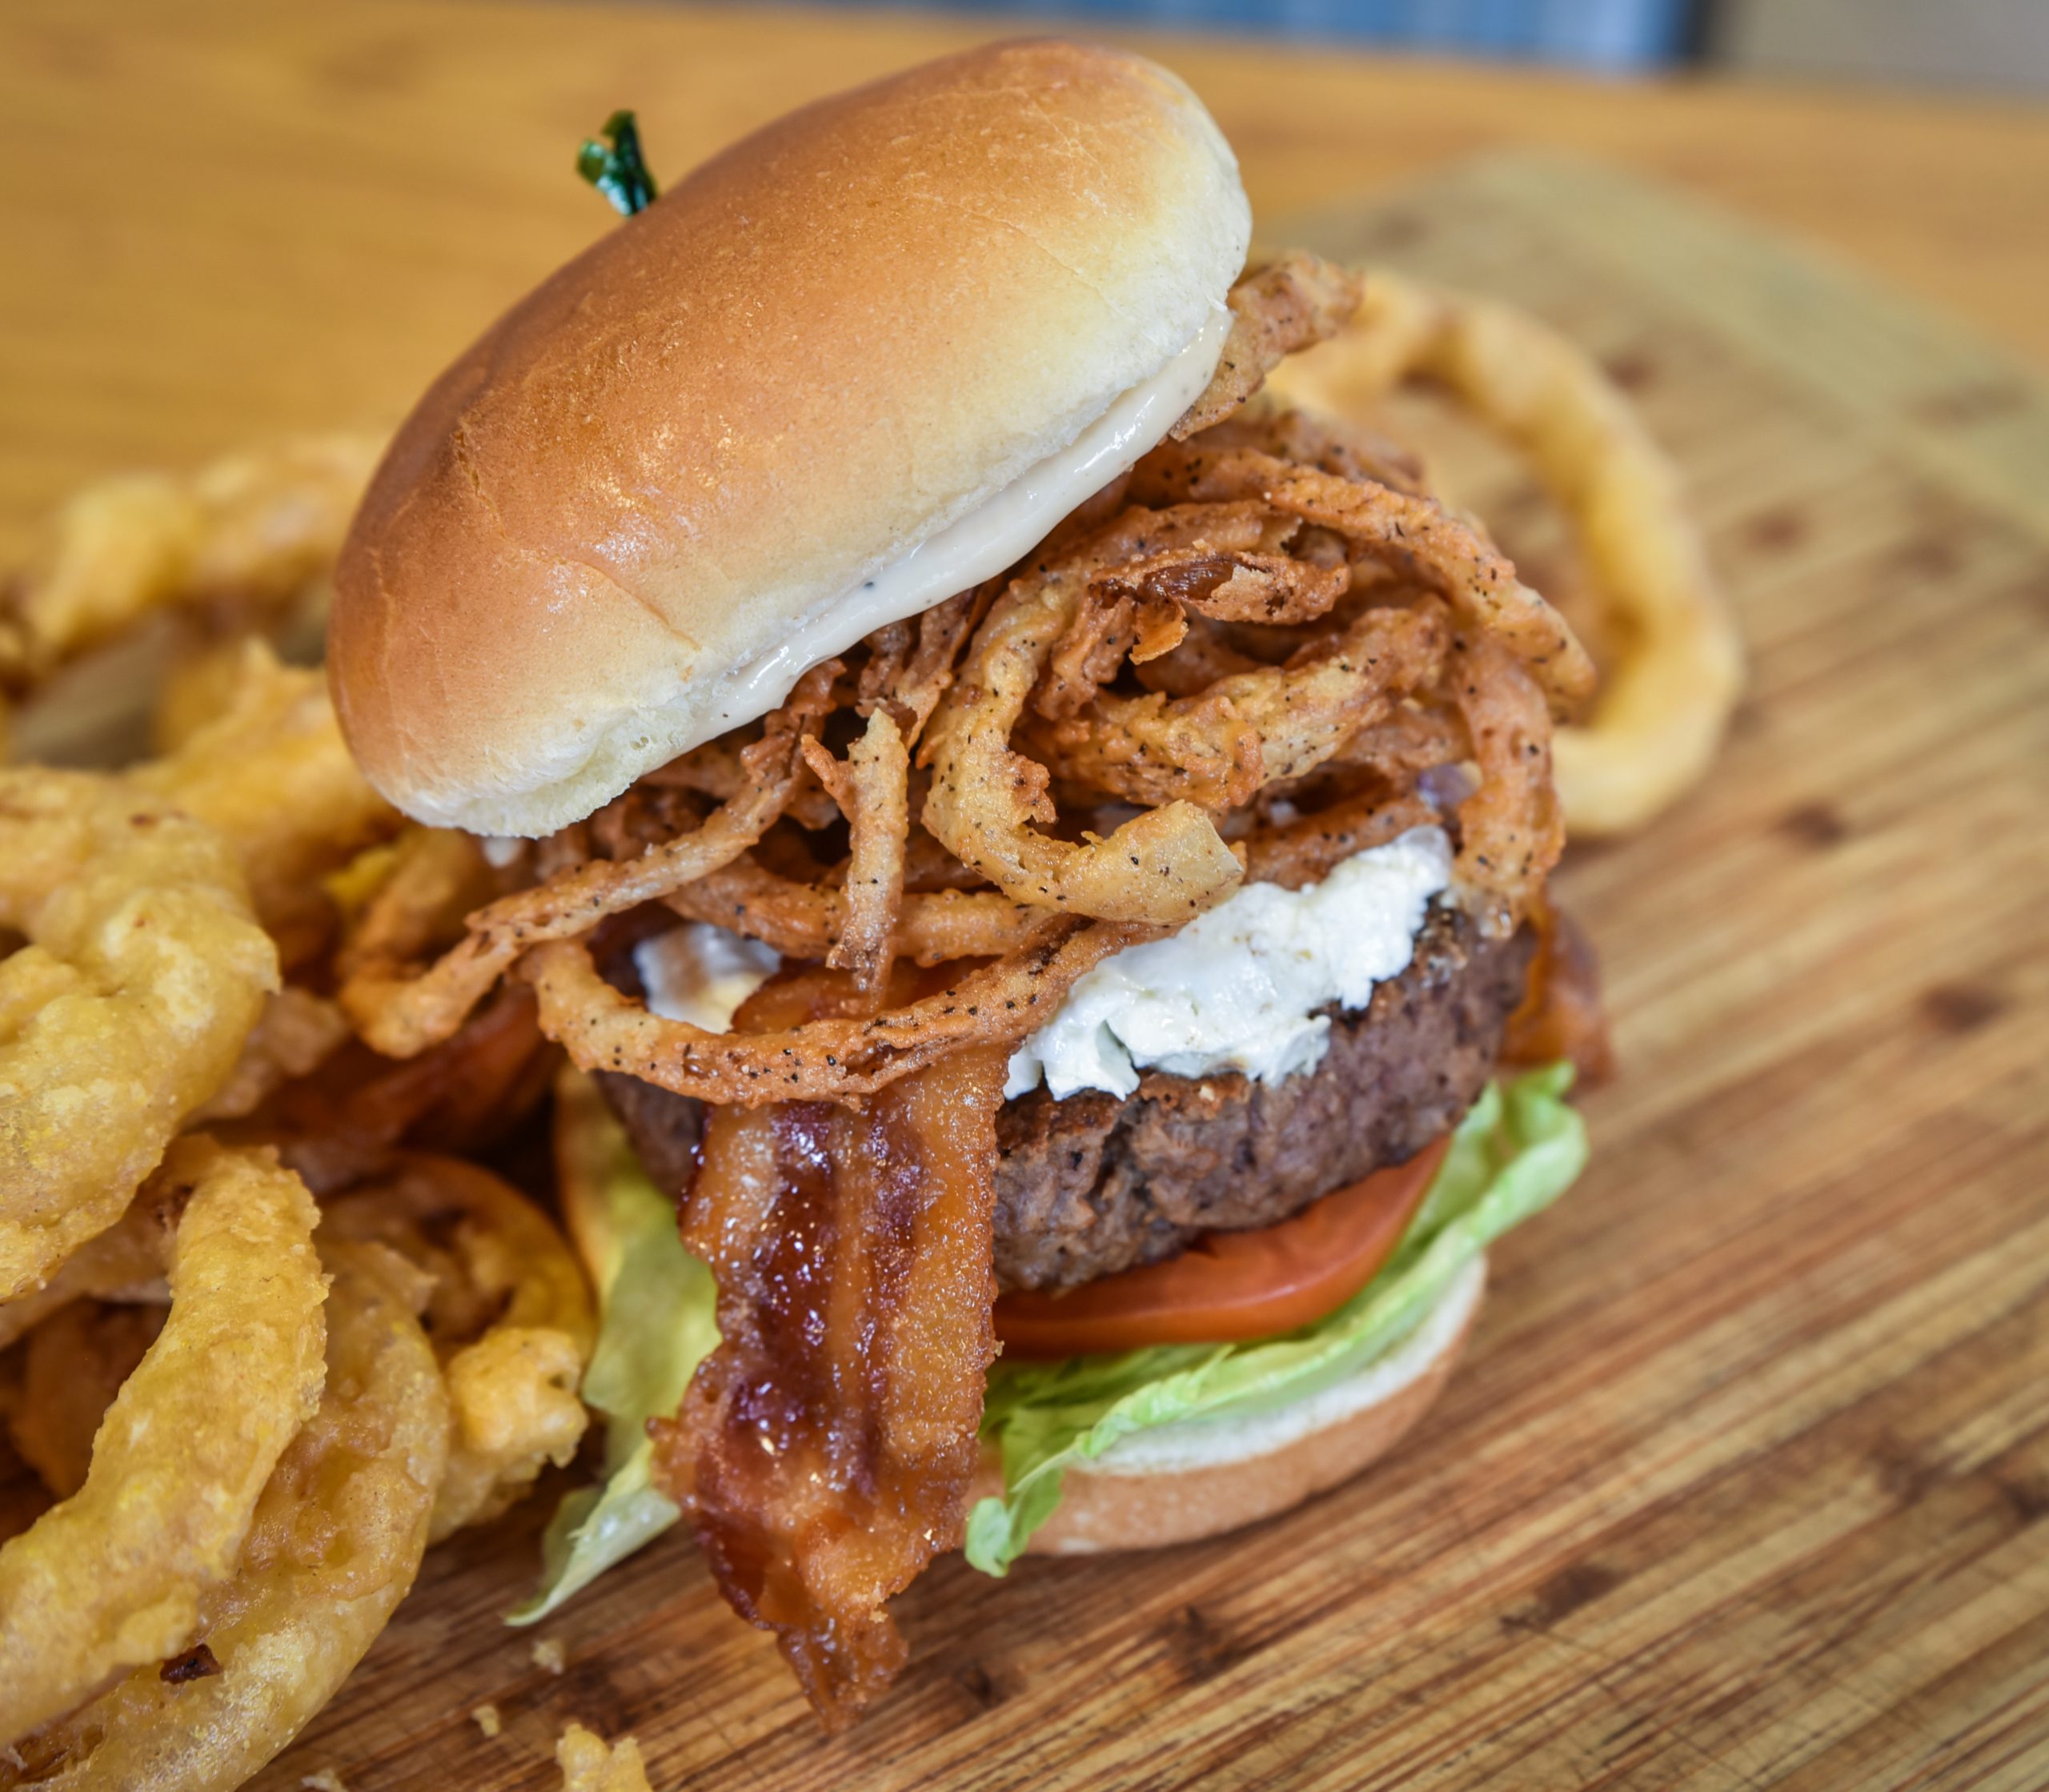 burger with onion rings